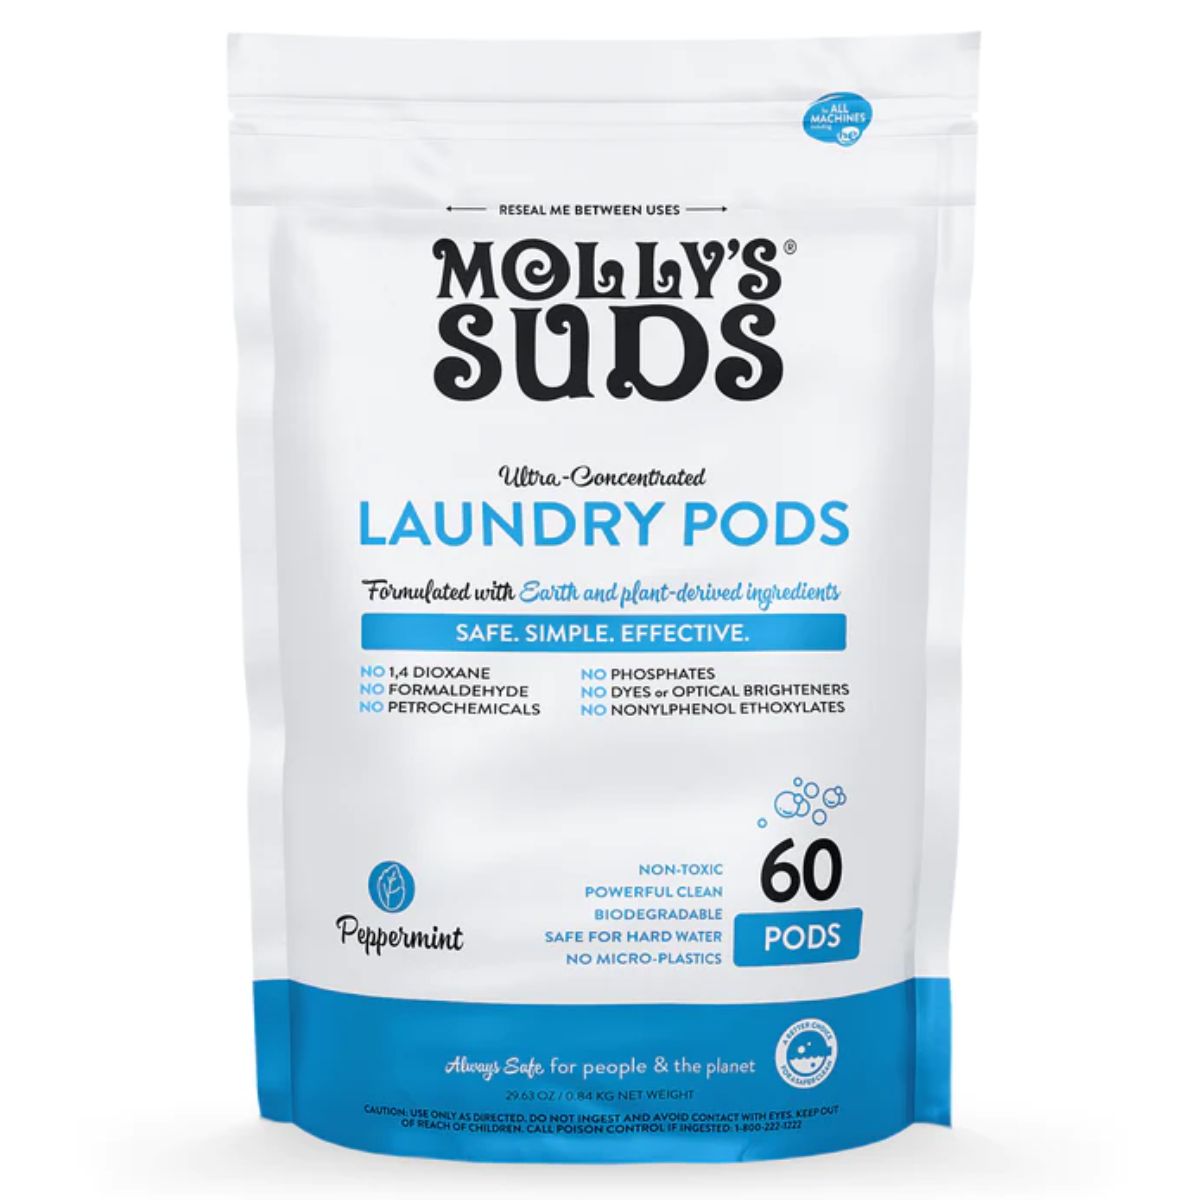 Molly's Suds Review- powdered laundry detergent